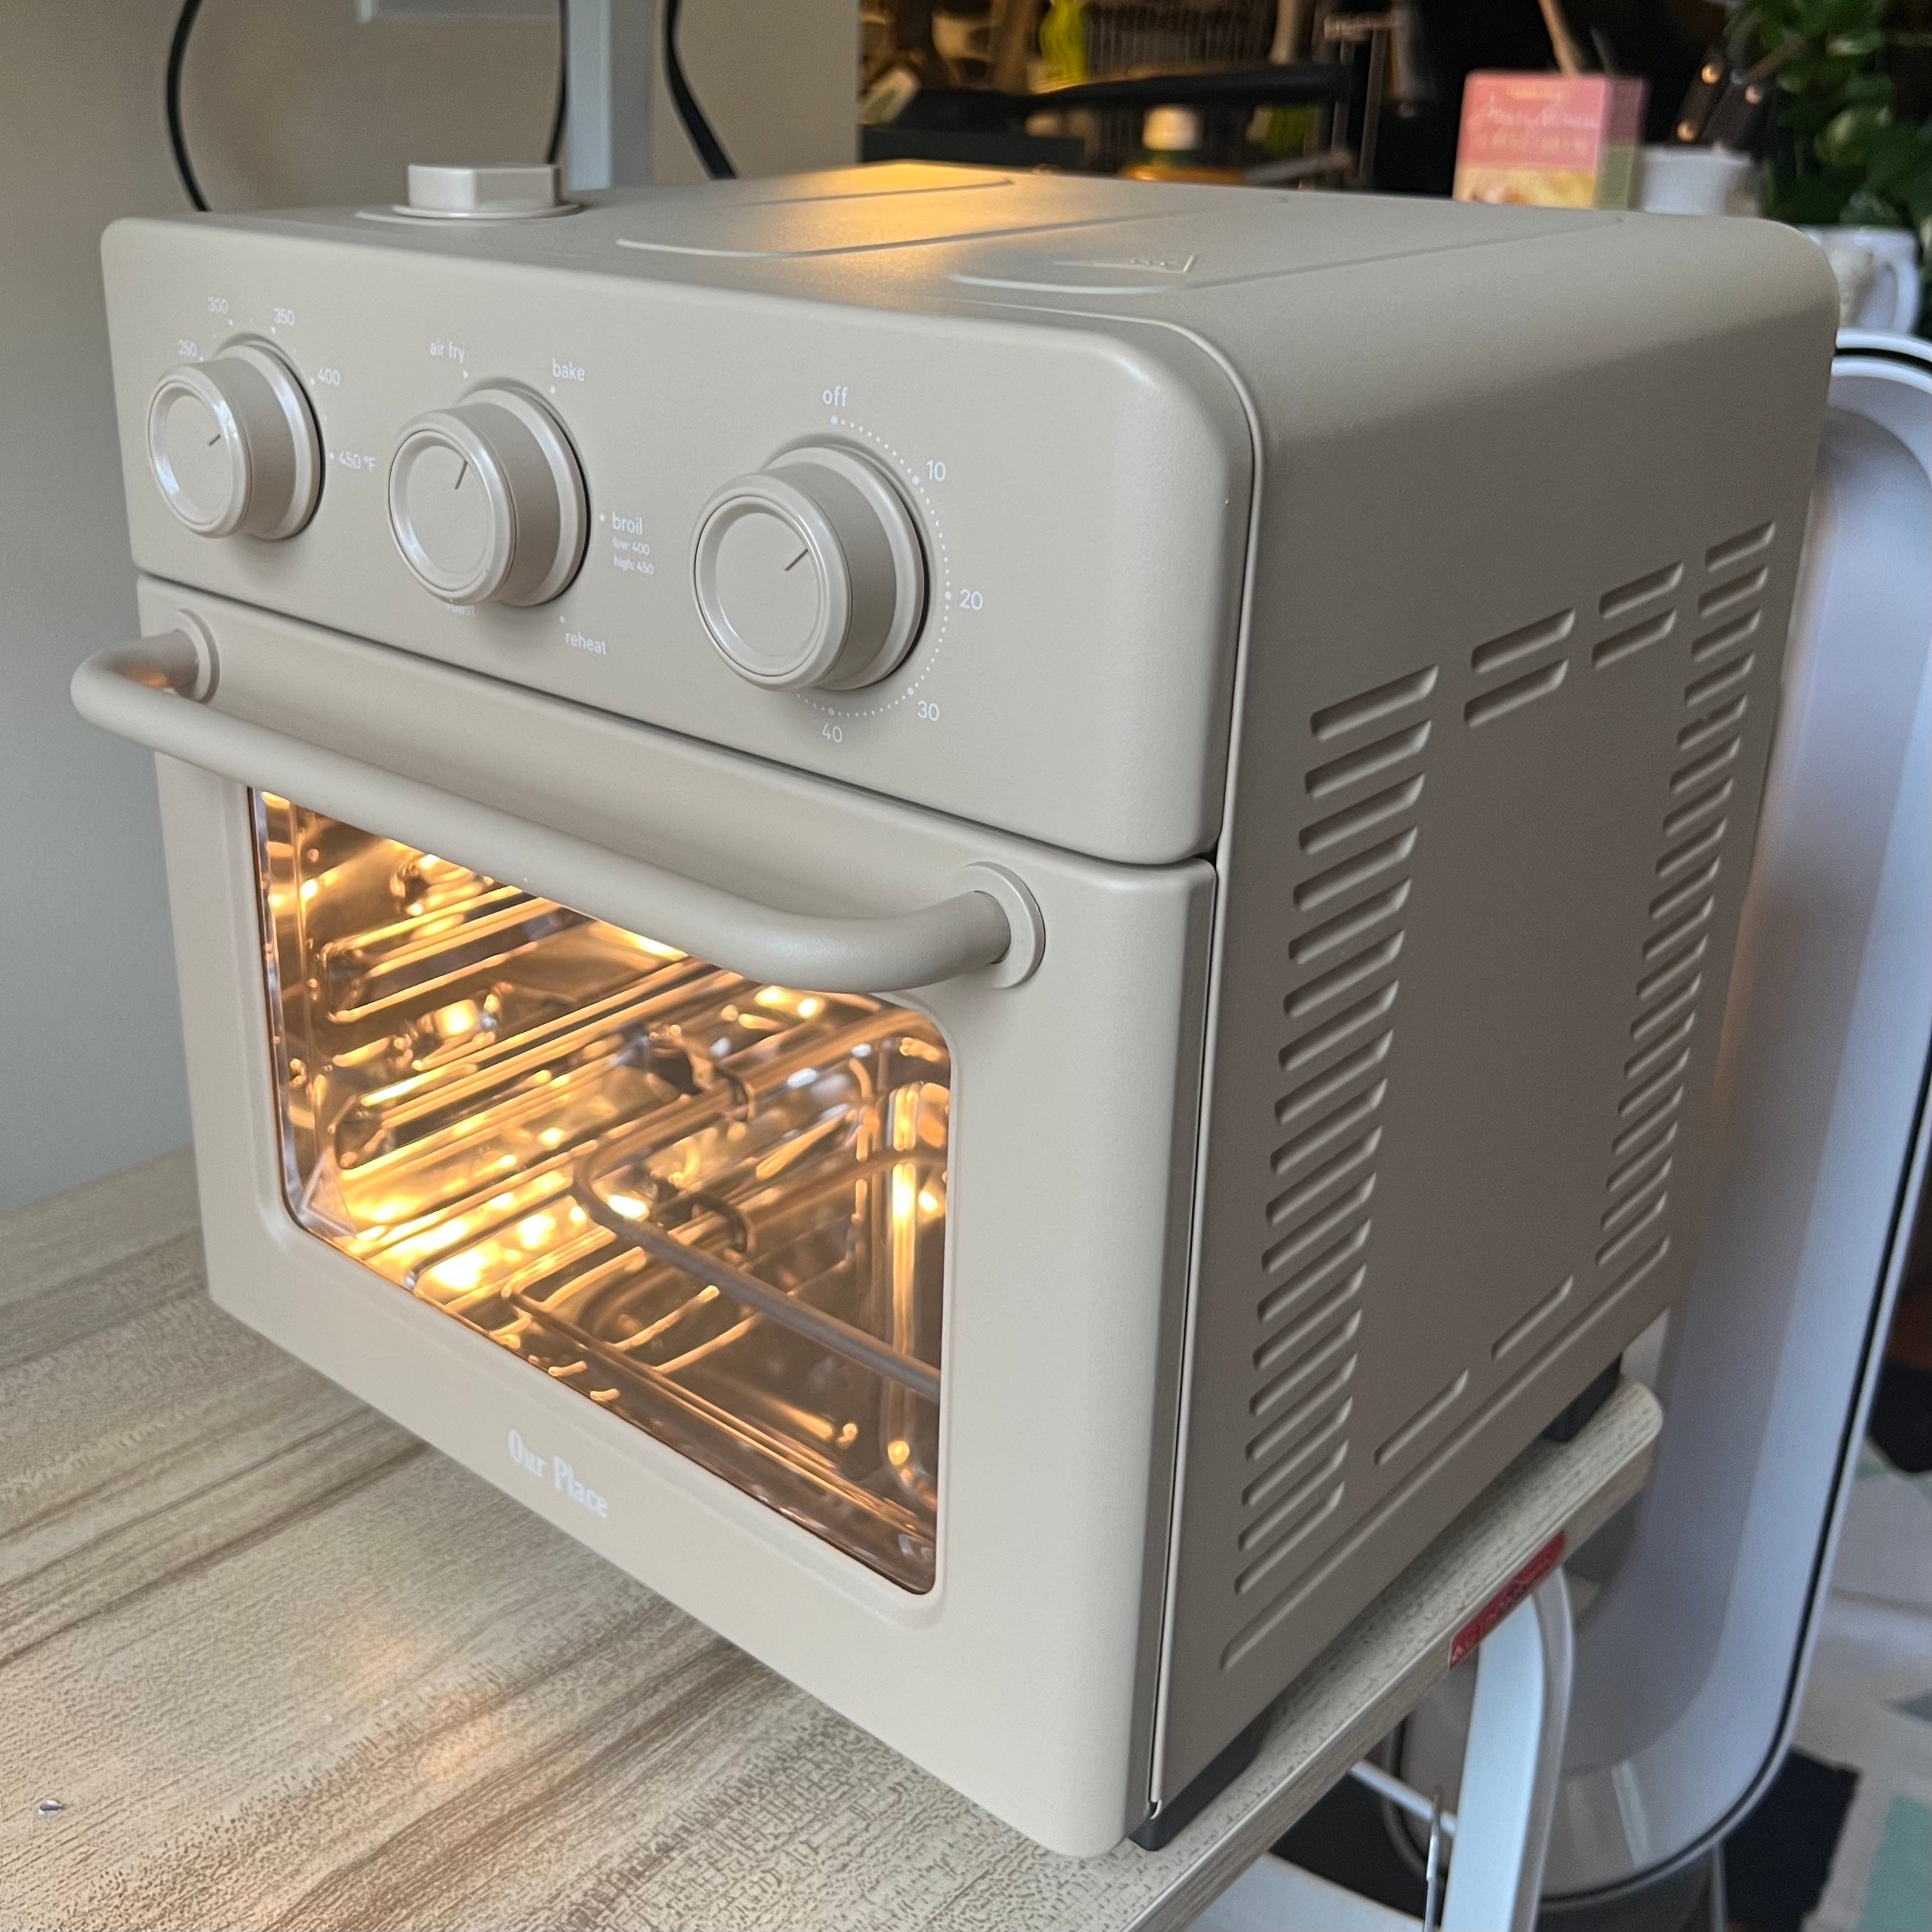 Our Place Wonder Oven Toaster & Toaster Oven Review - Consumer Reports